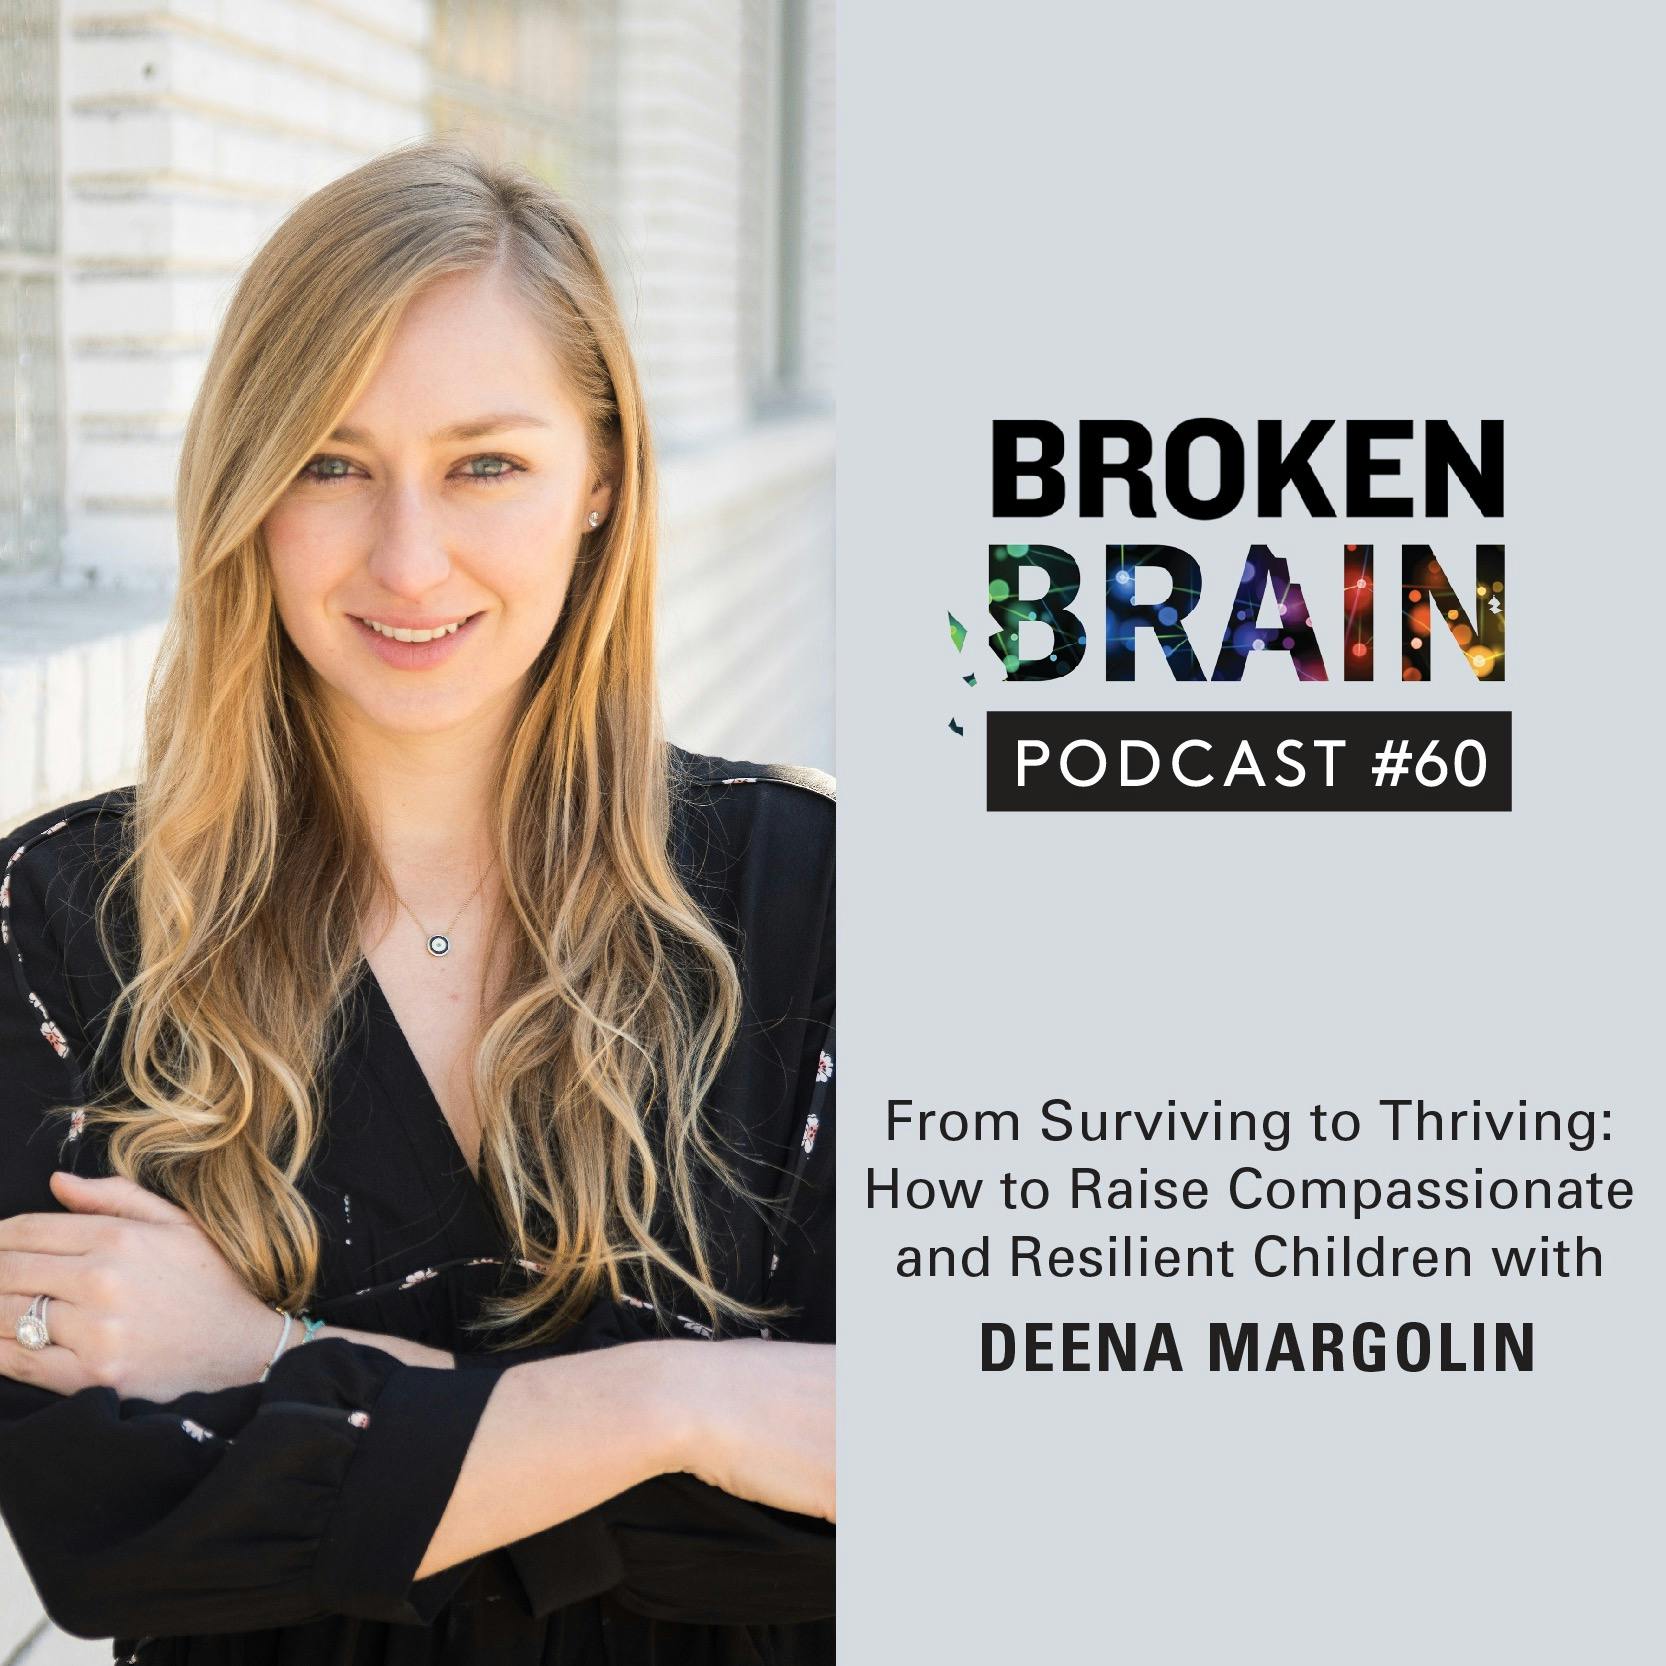 #60: From Surviving to Thriving: How to Raise Compassionate and Resilient Children with Deena Margolin